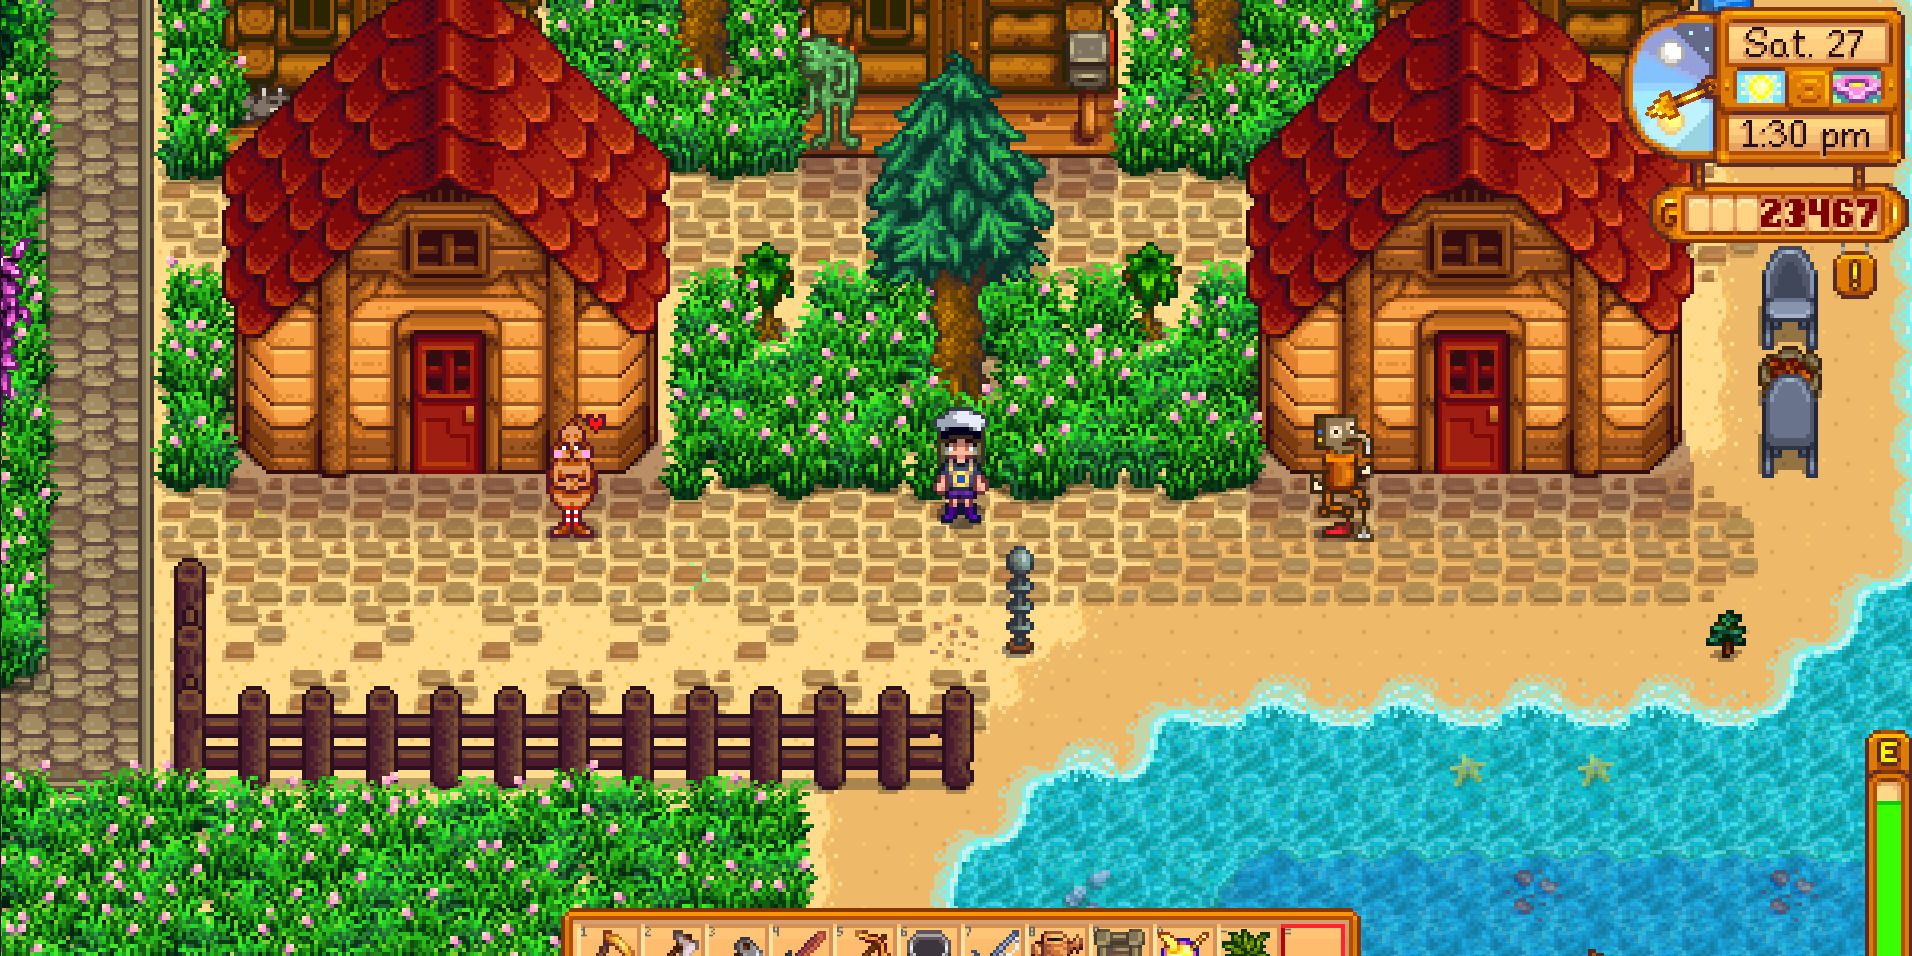 Image of a character standing between two buildings with some secret statues in Stardew Valley